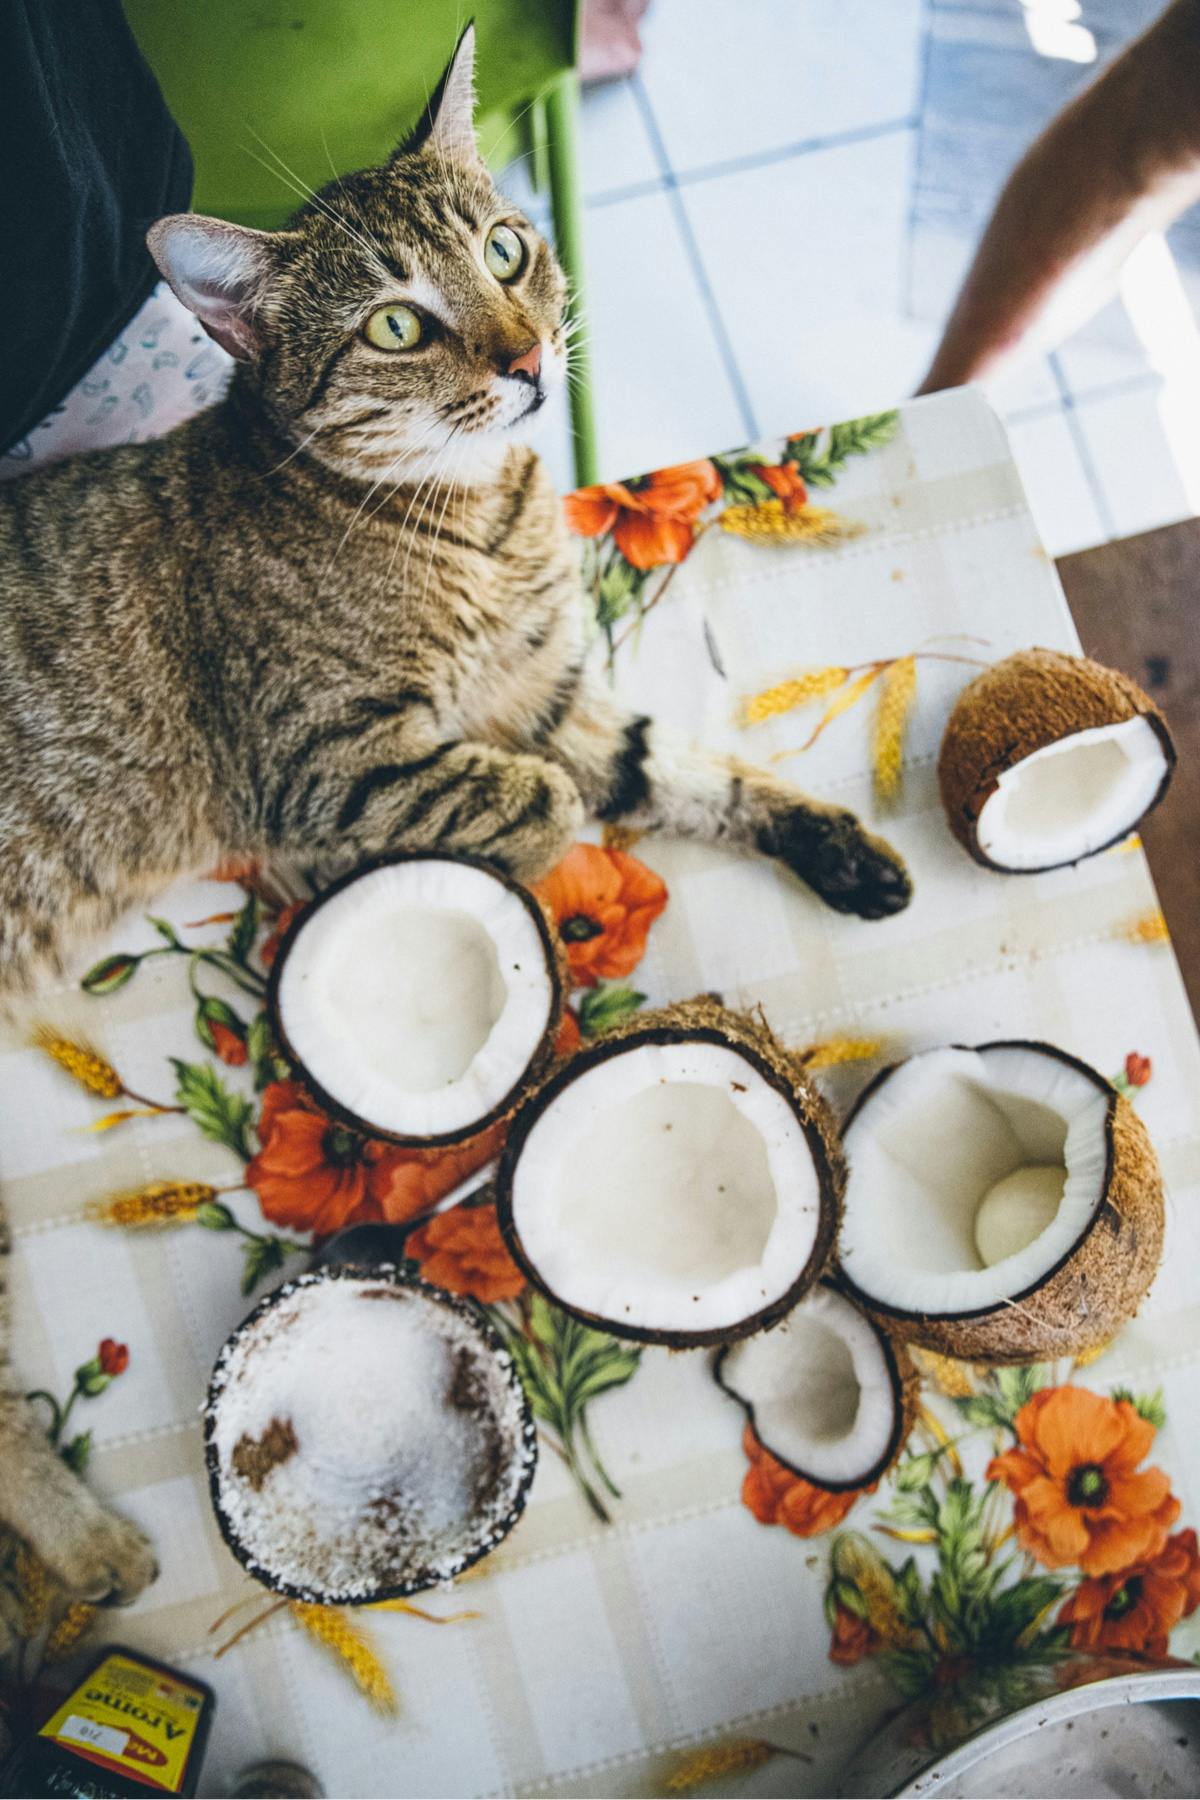 a cat lays on a table next to some opened coconuts